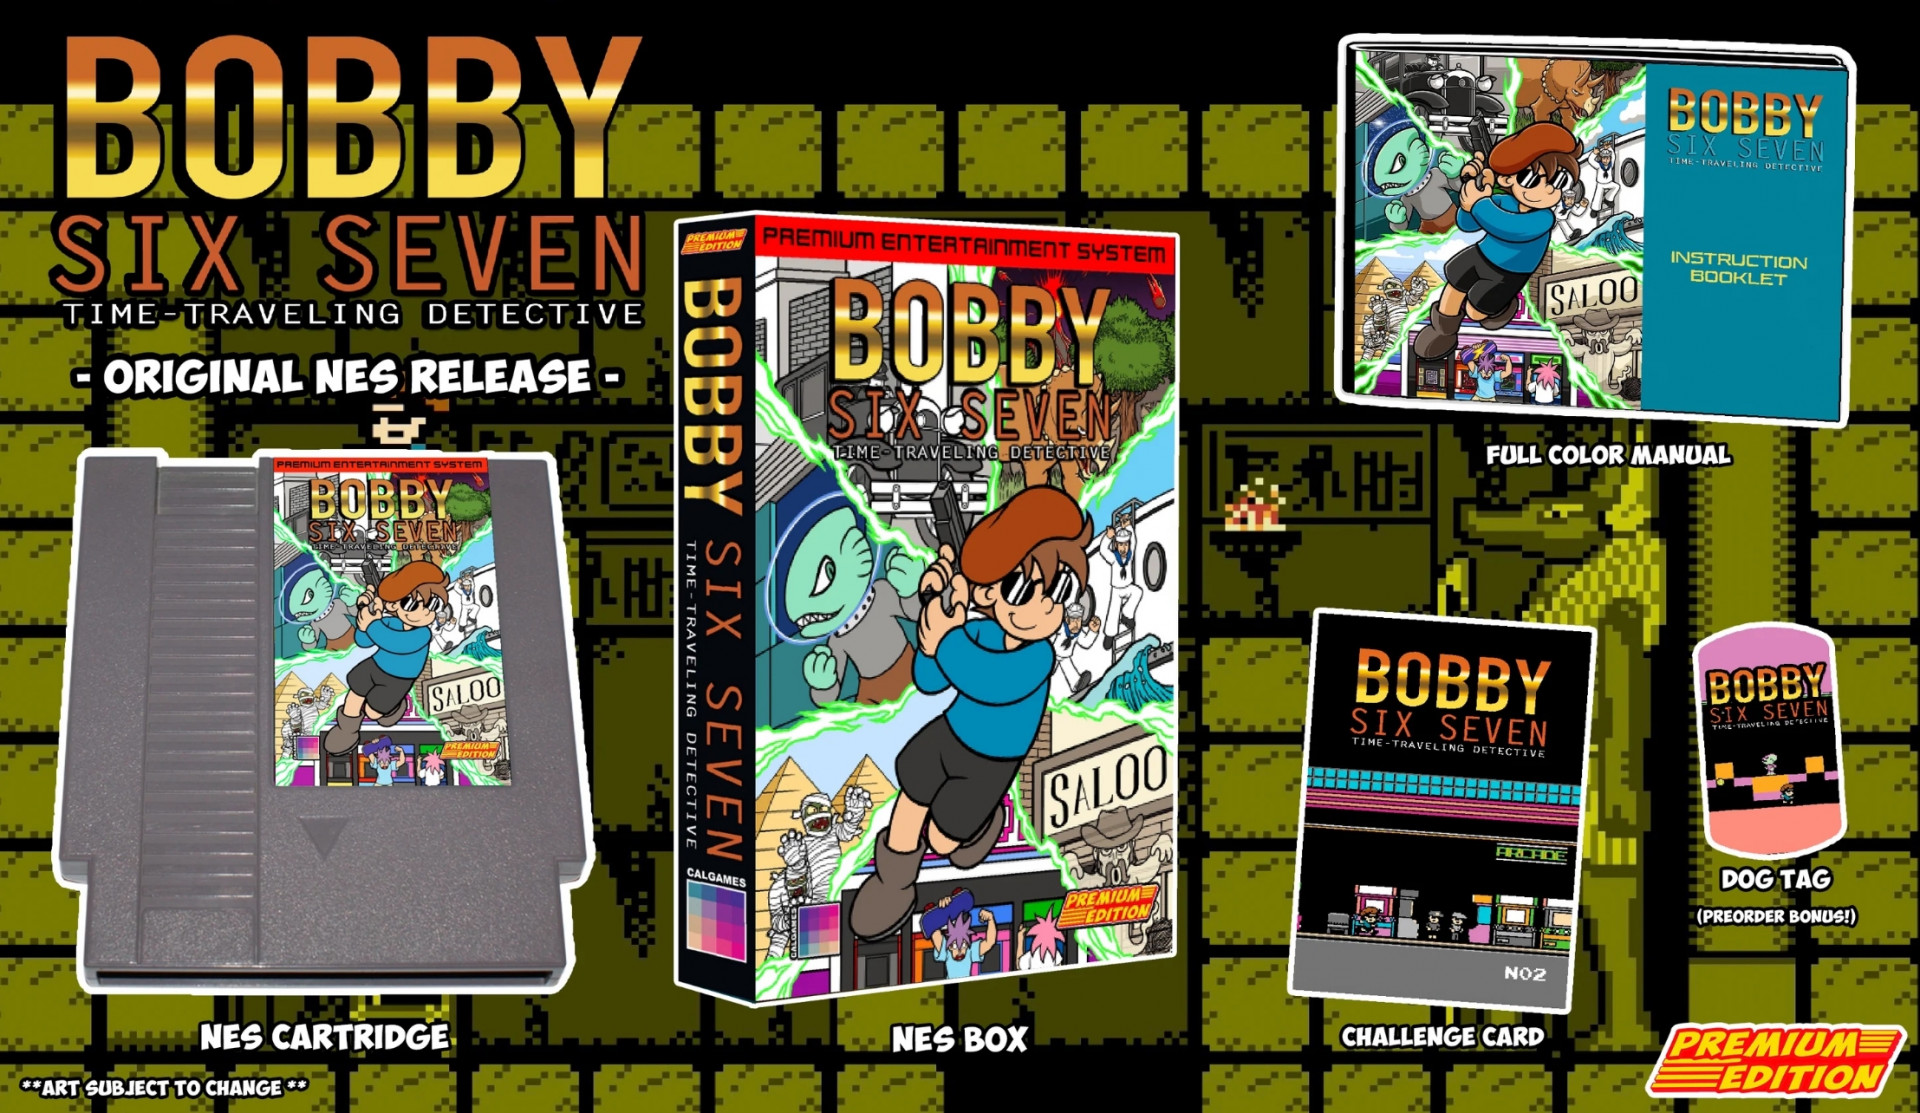 Bobby Six Seven: Time-Traveling Detective NES Edition